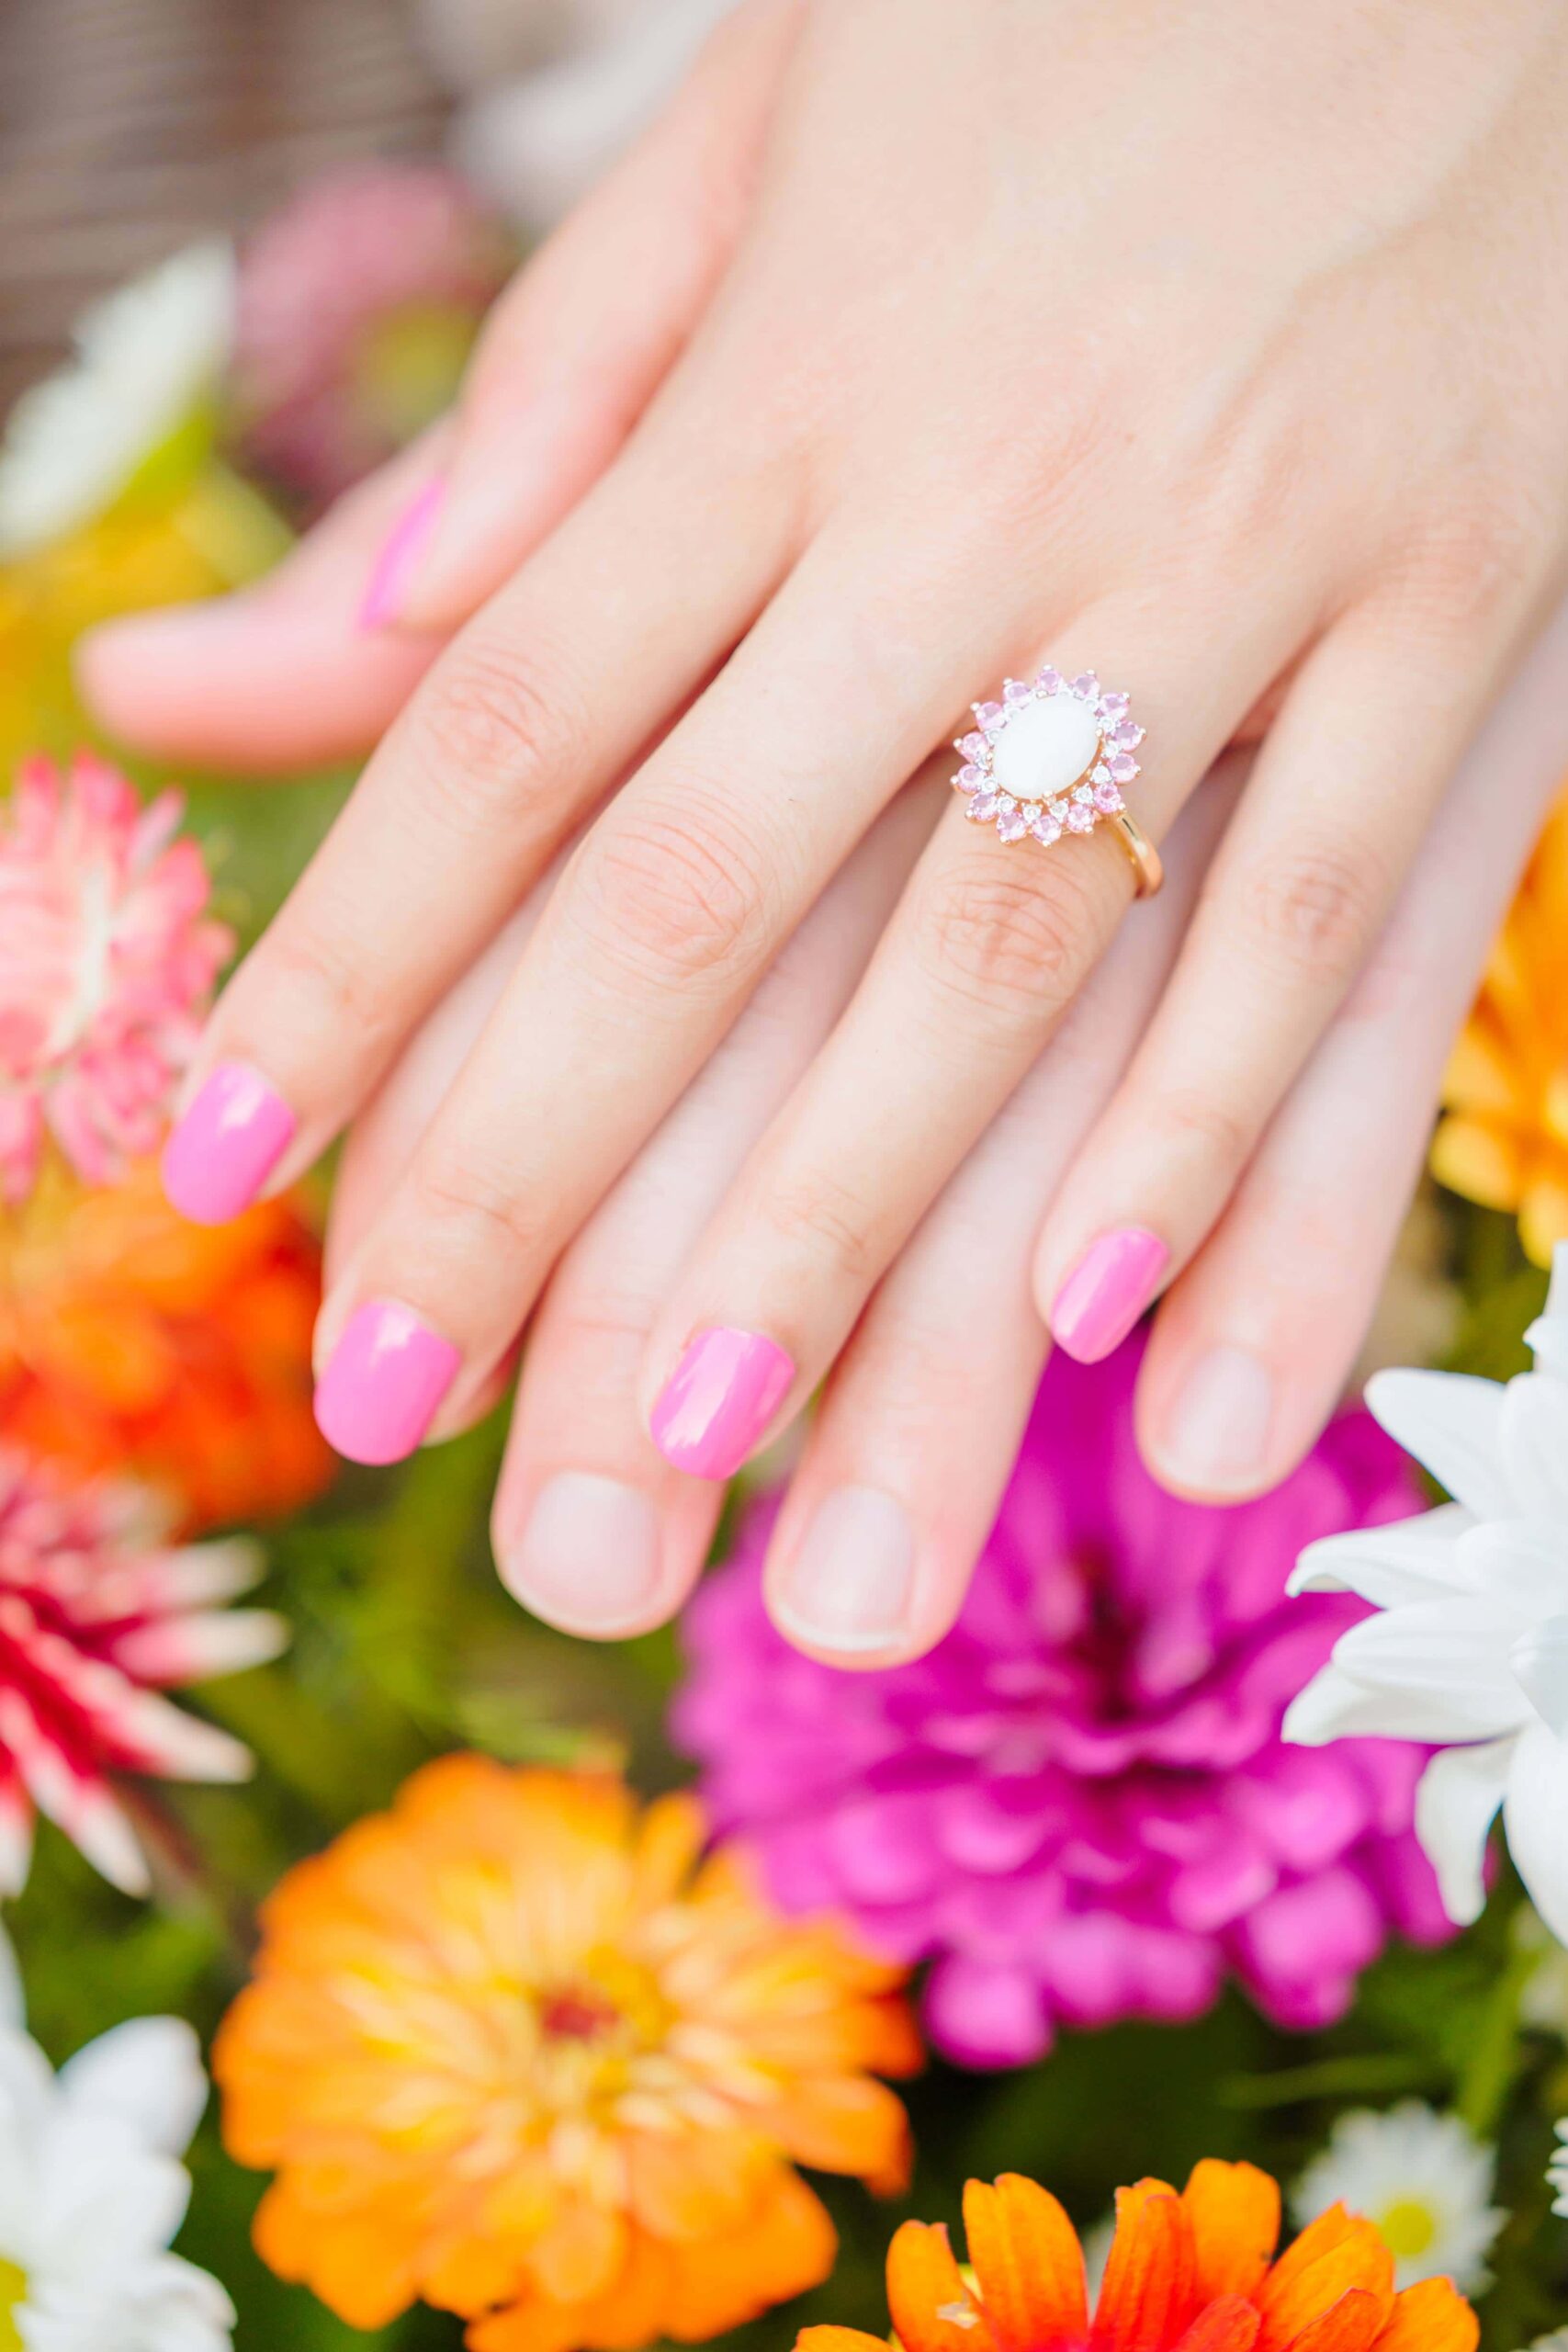 A disco wedding ring with an opal surrounding by pink stones is shown with bright flowers in the background.